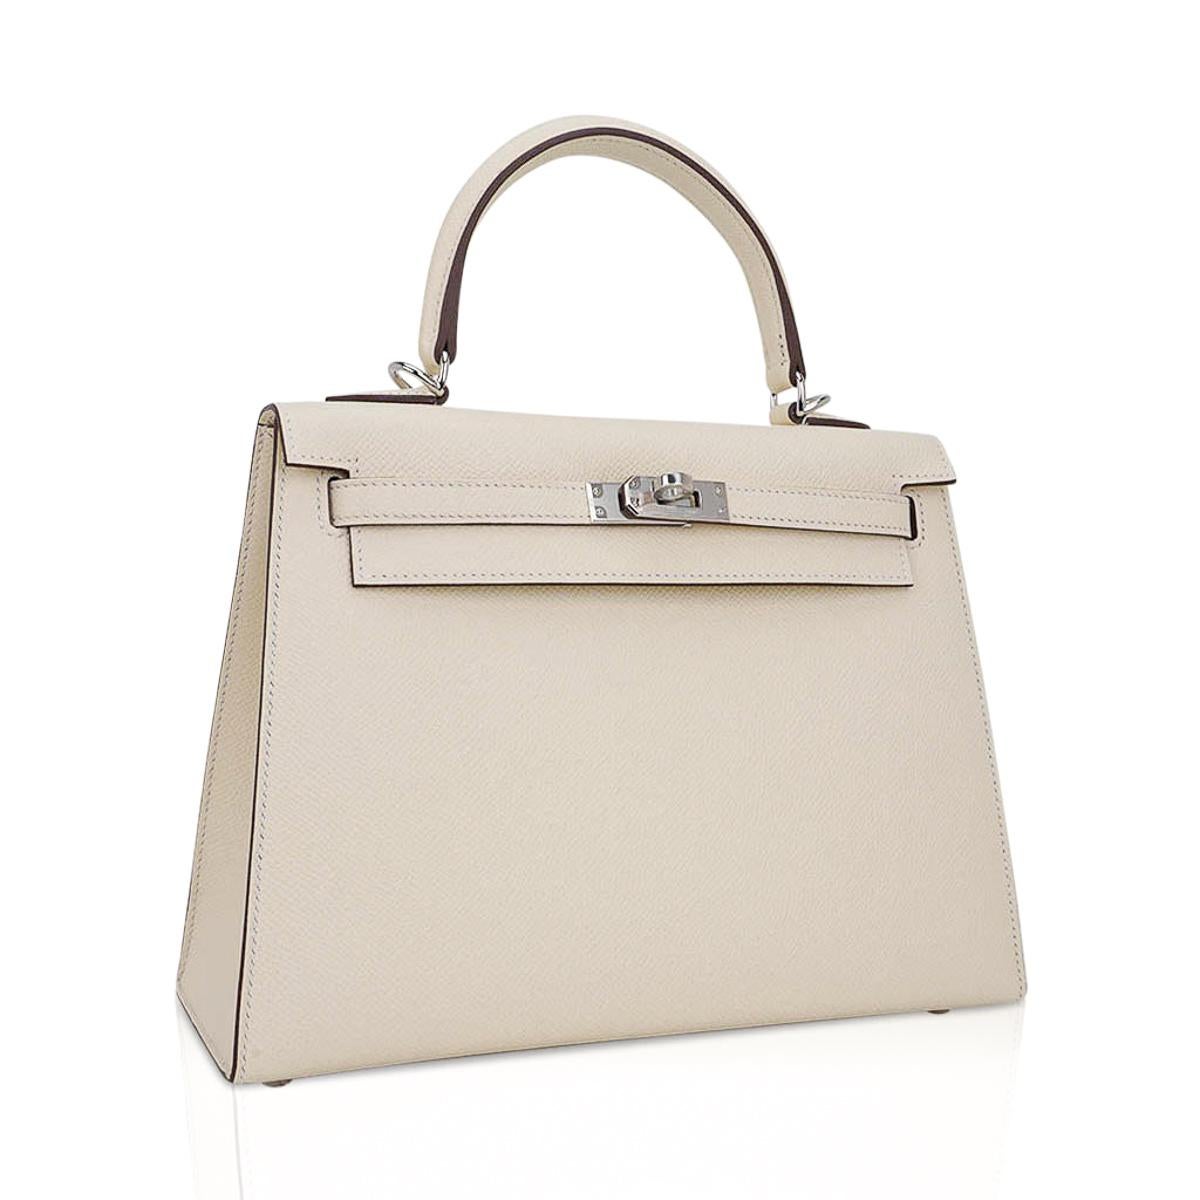 Mightychic offers an Hermes Kelly Sellier 25 bag featured in neutral Nata.
This  beautiful colour is fast becoming a unicorn and a collectors treasure.
A chic and stylish authentic Hermes Kelly bag in Epsom Hermes leather with rich gold